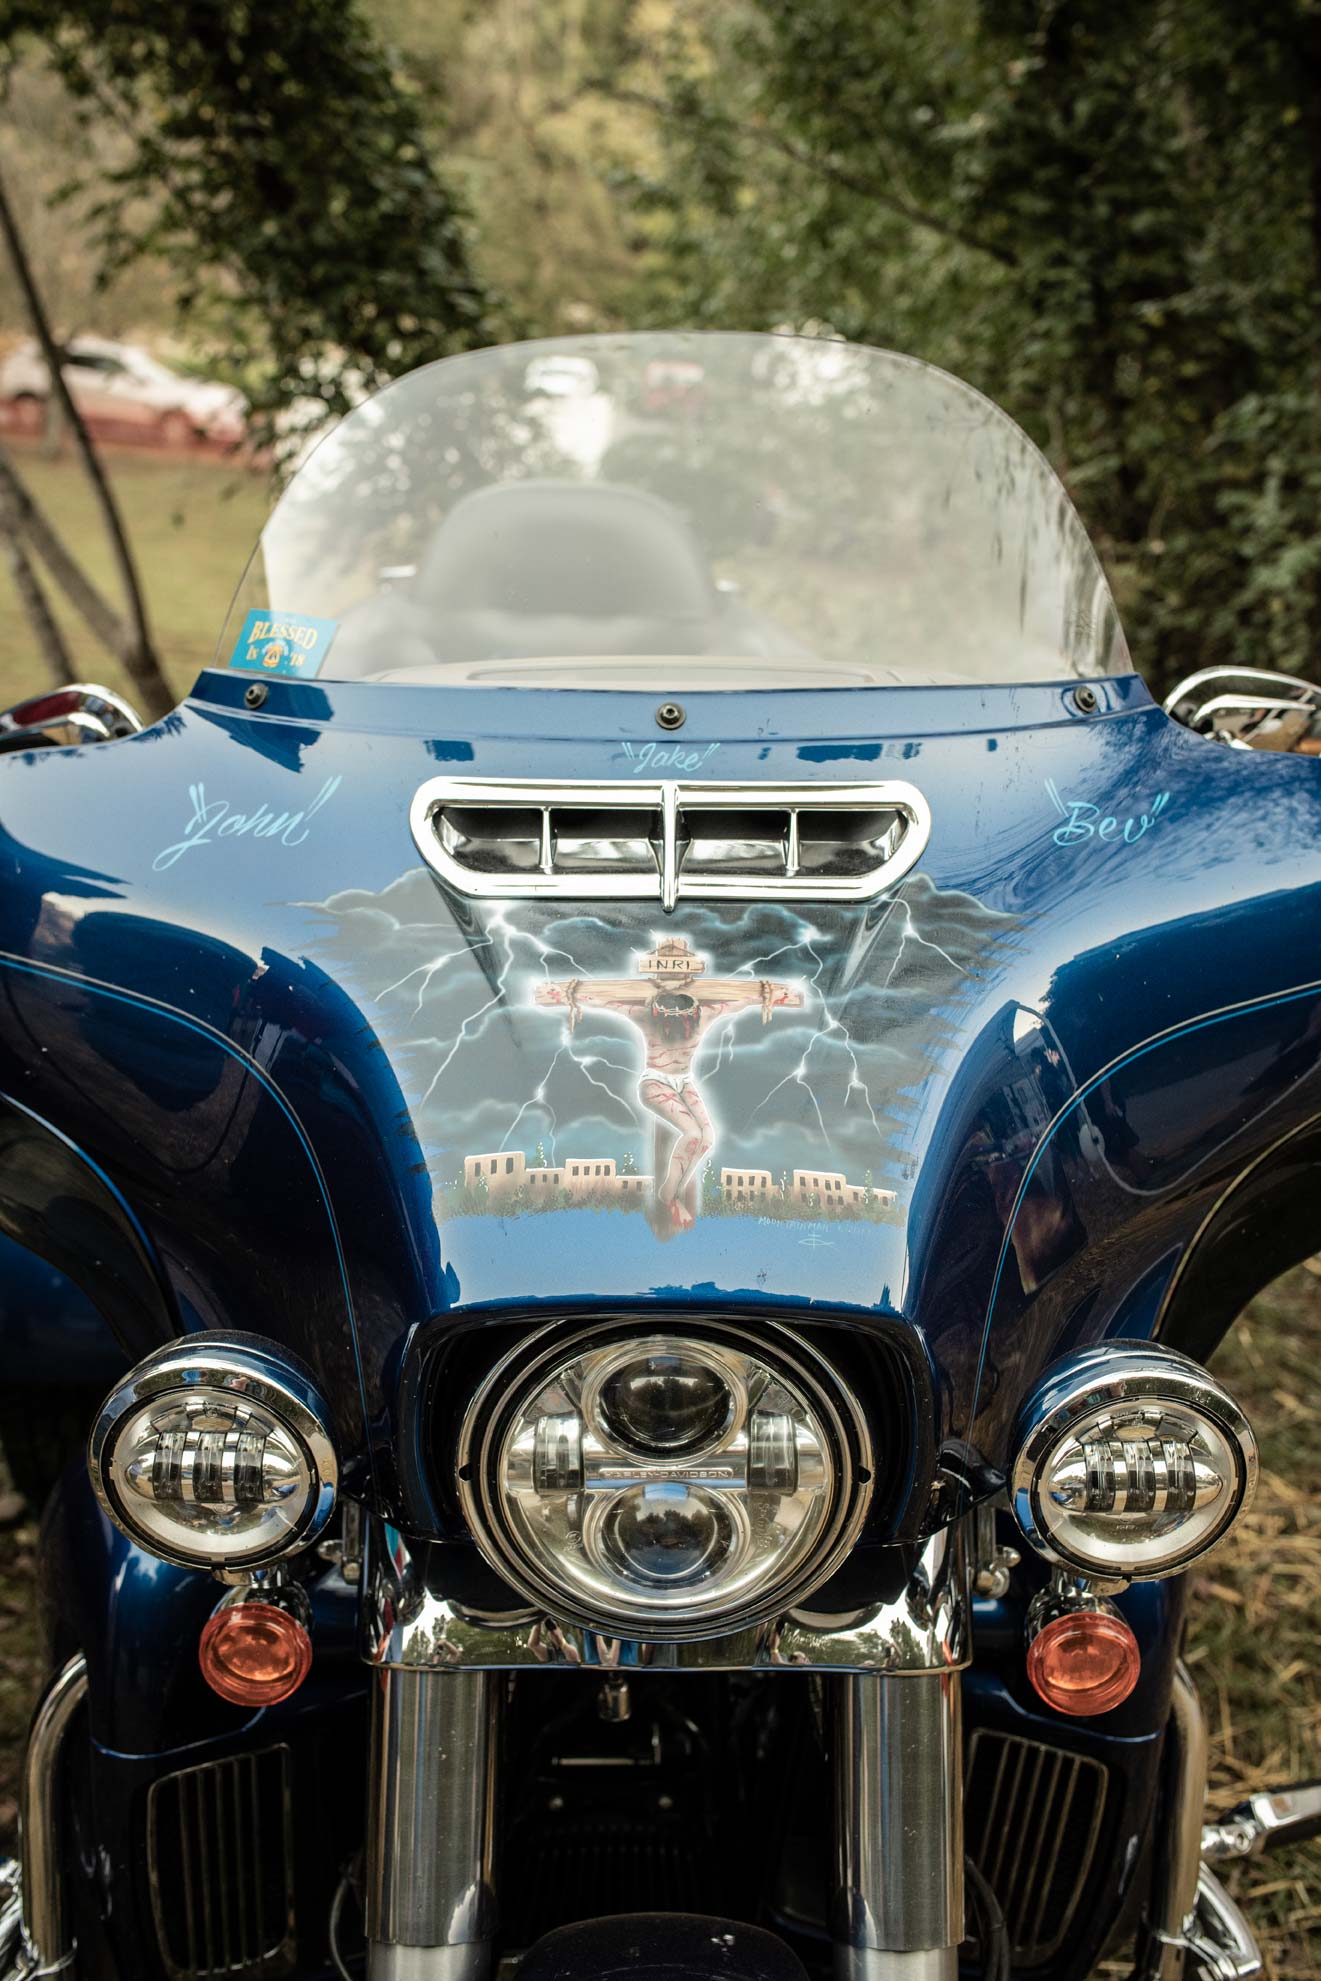 National Trailfest: A motorcycle painted with the name John, Jake, Bev, and a picture of the crucifixion